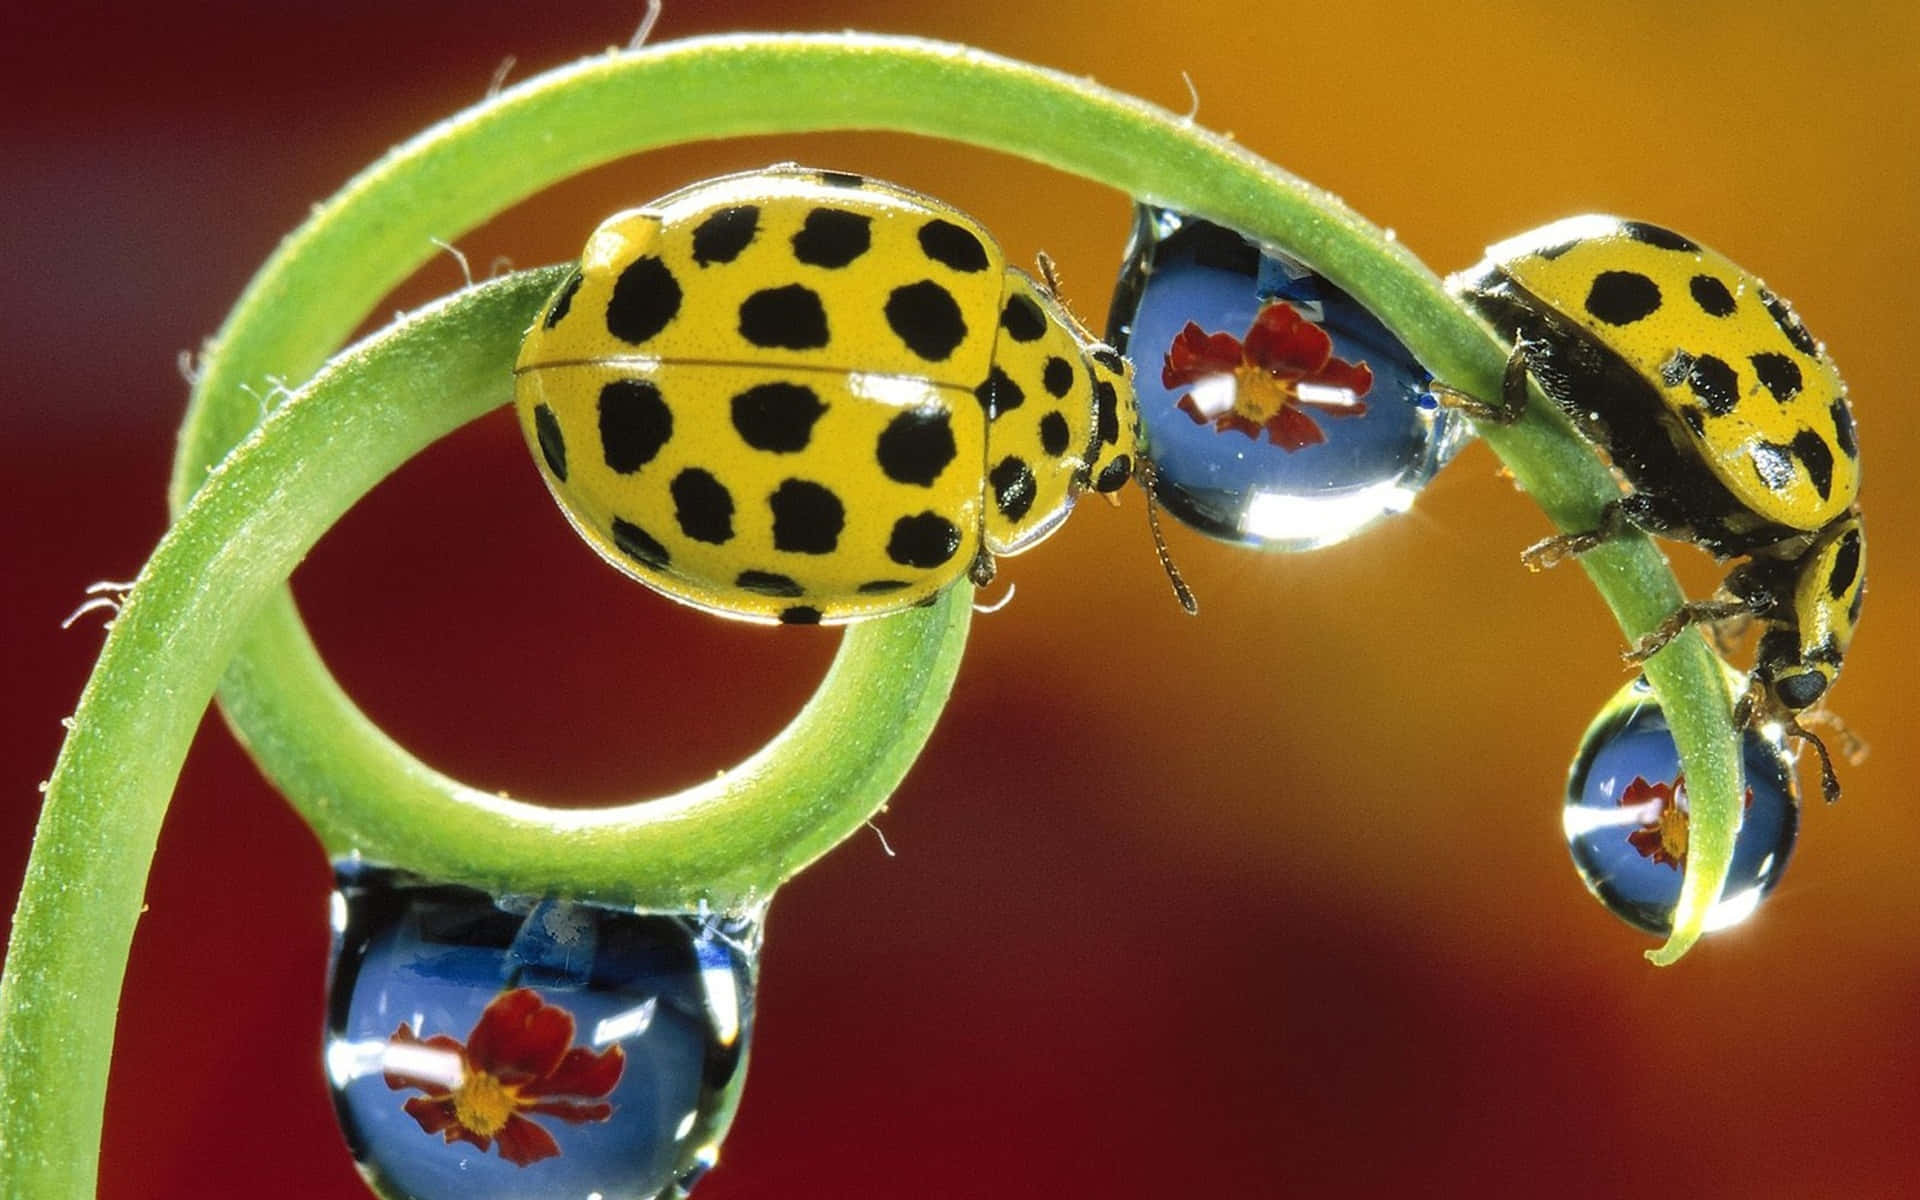 A red and black ladybug sits perched on a leaf.